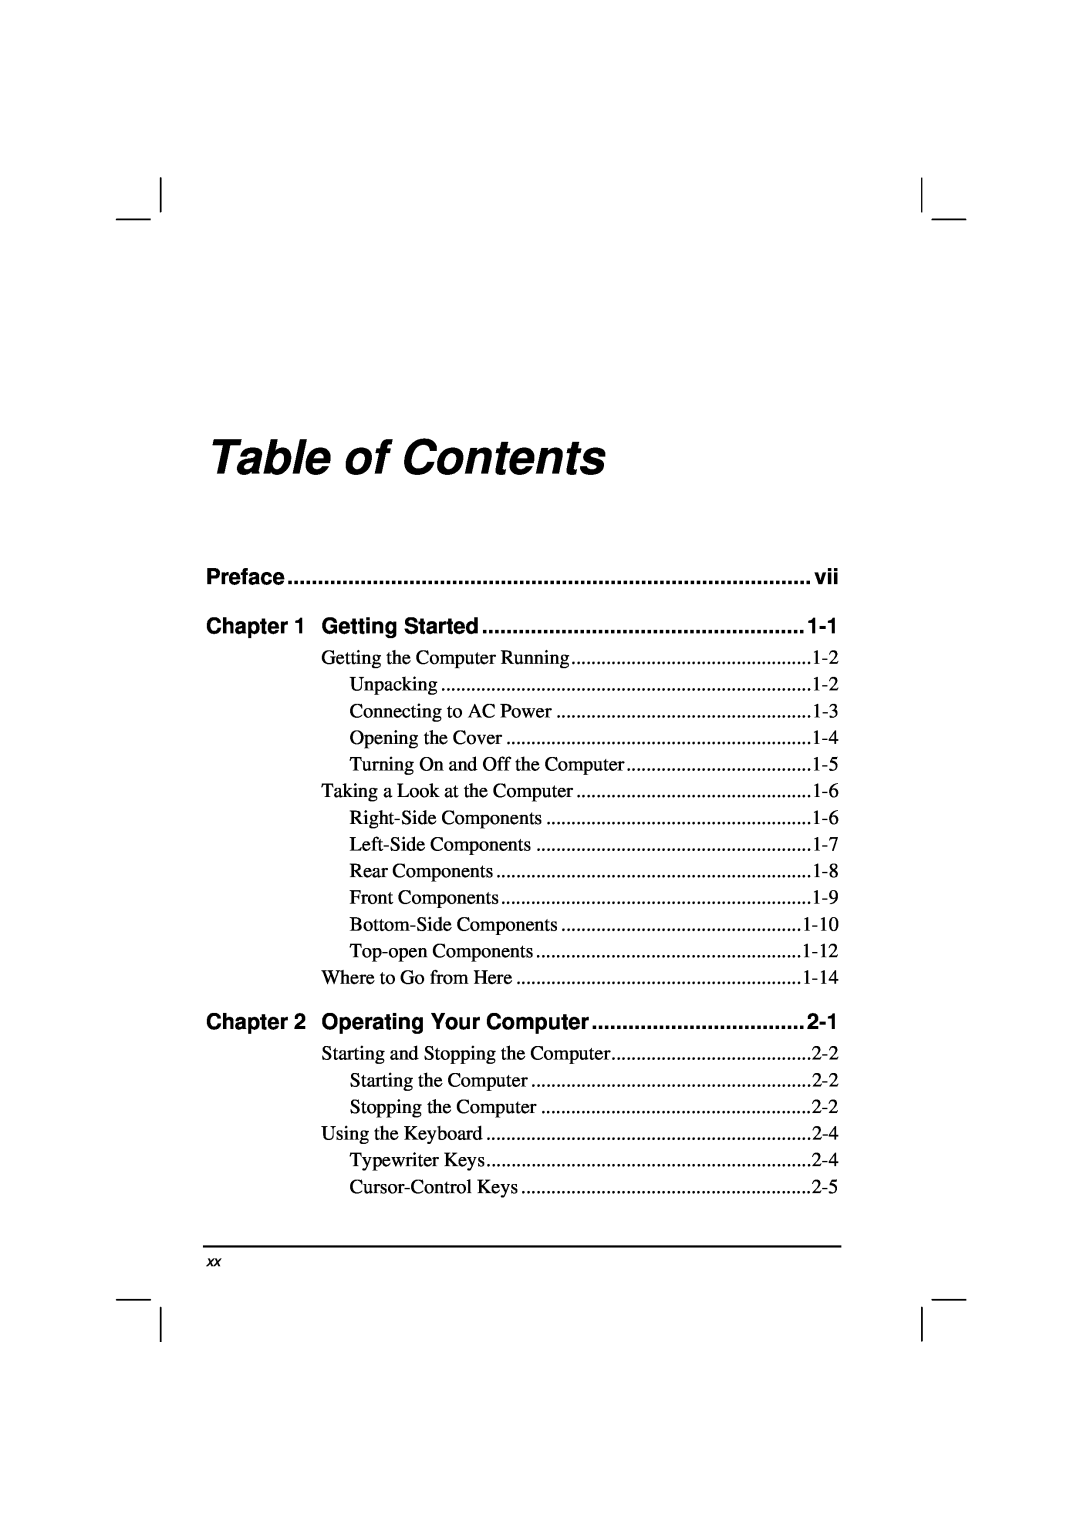 Casio HK1223 owner manual Table of Contents, Preface, Getting Started, Operating Your Computer 